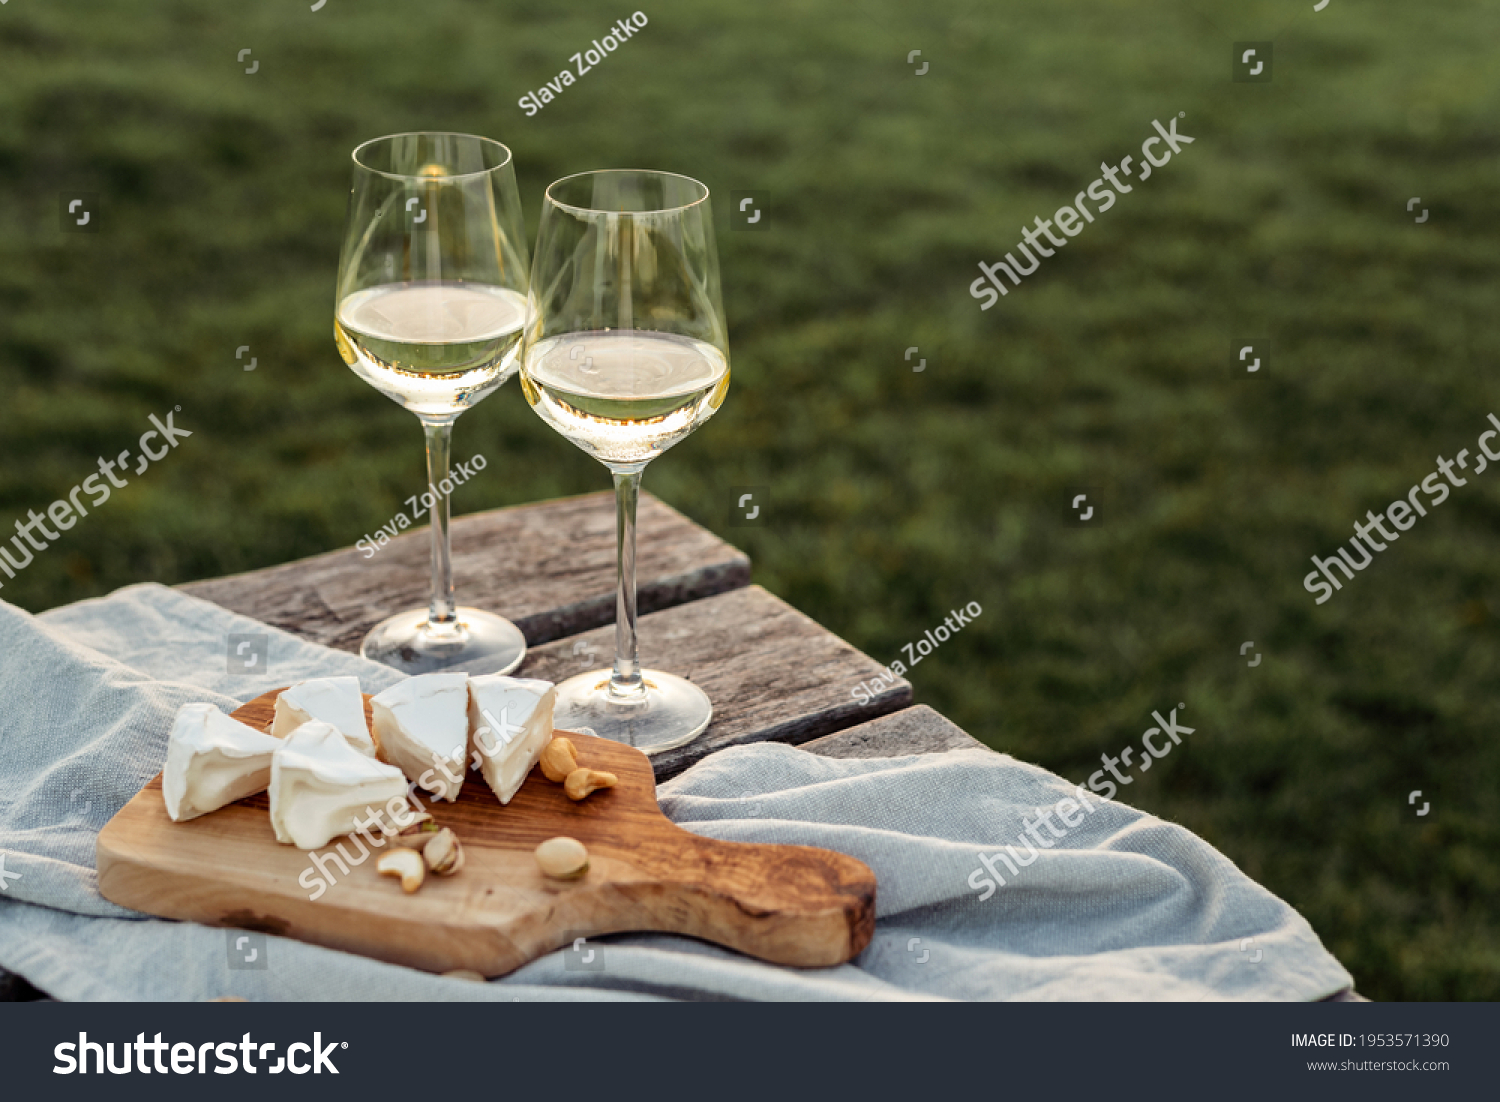 Two glasses of white wine and a wooden plate with cheese and nuts served outside at sunset. #1953571390